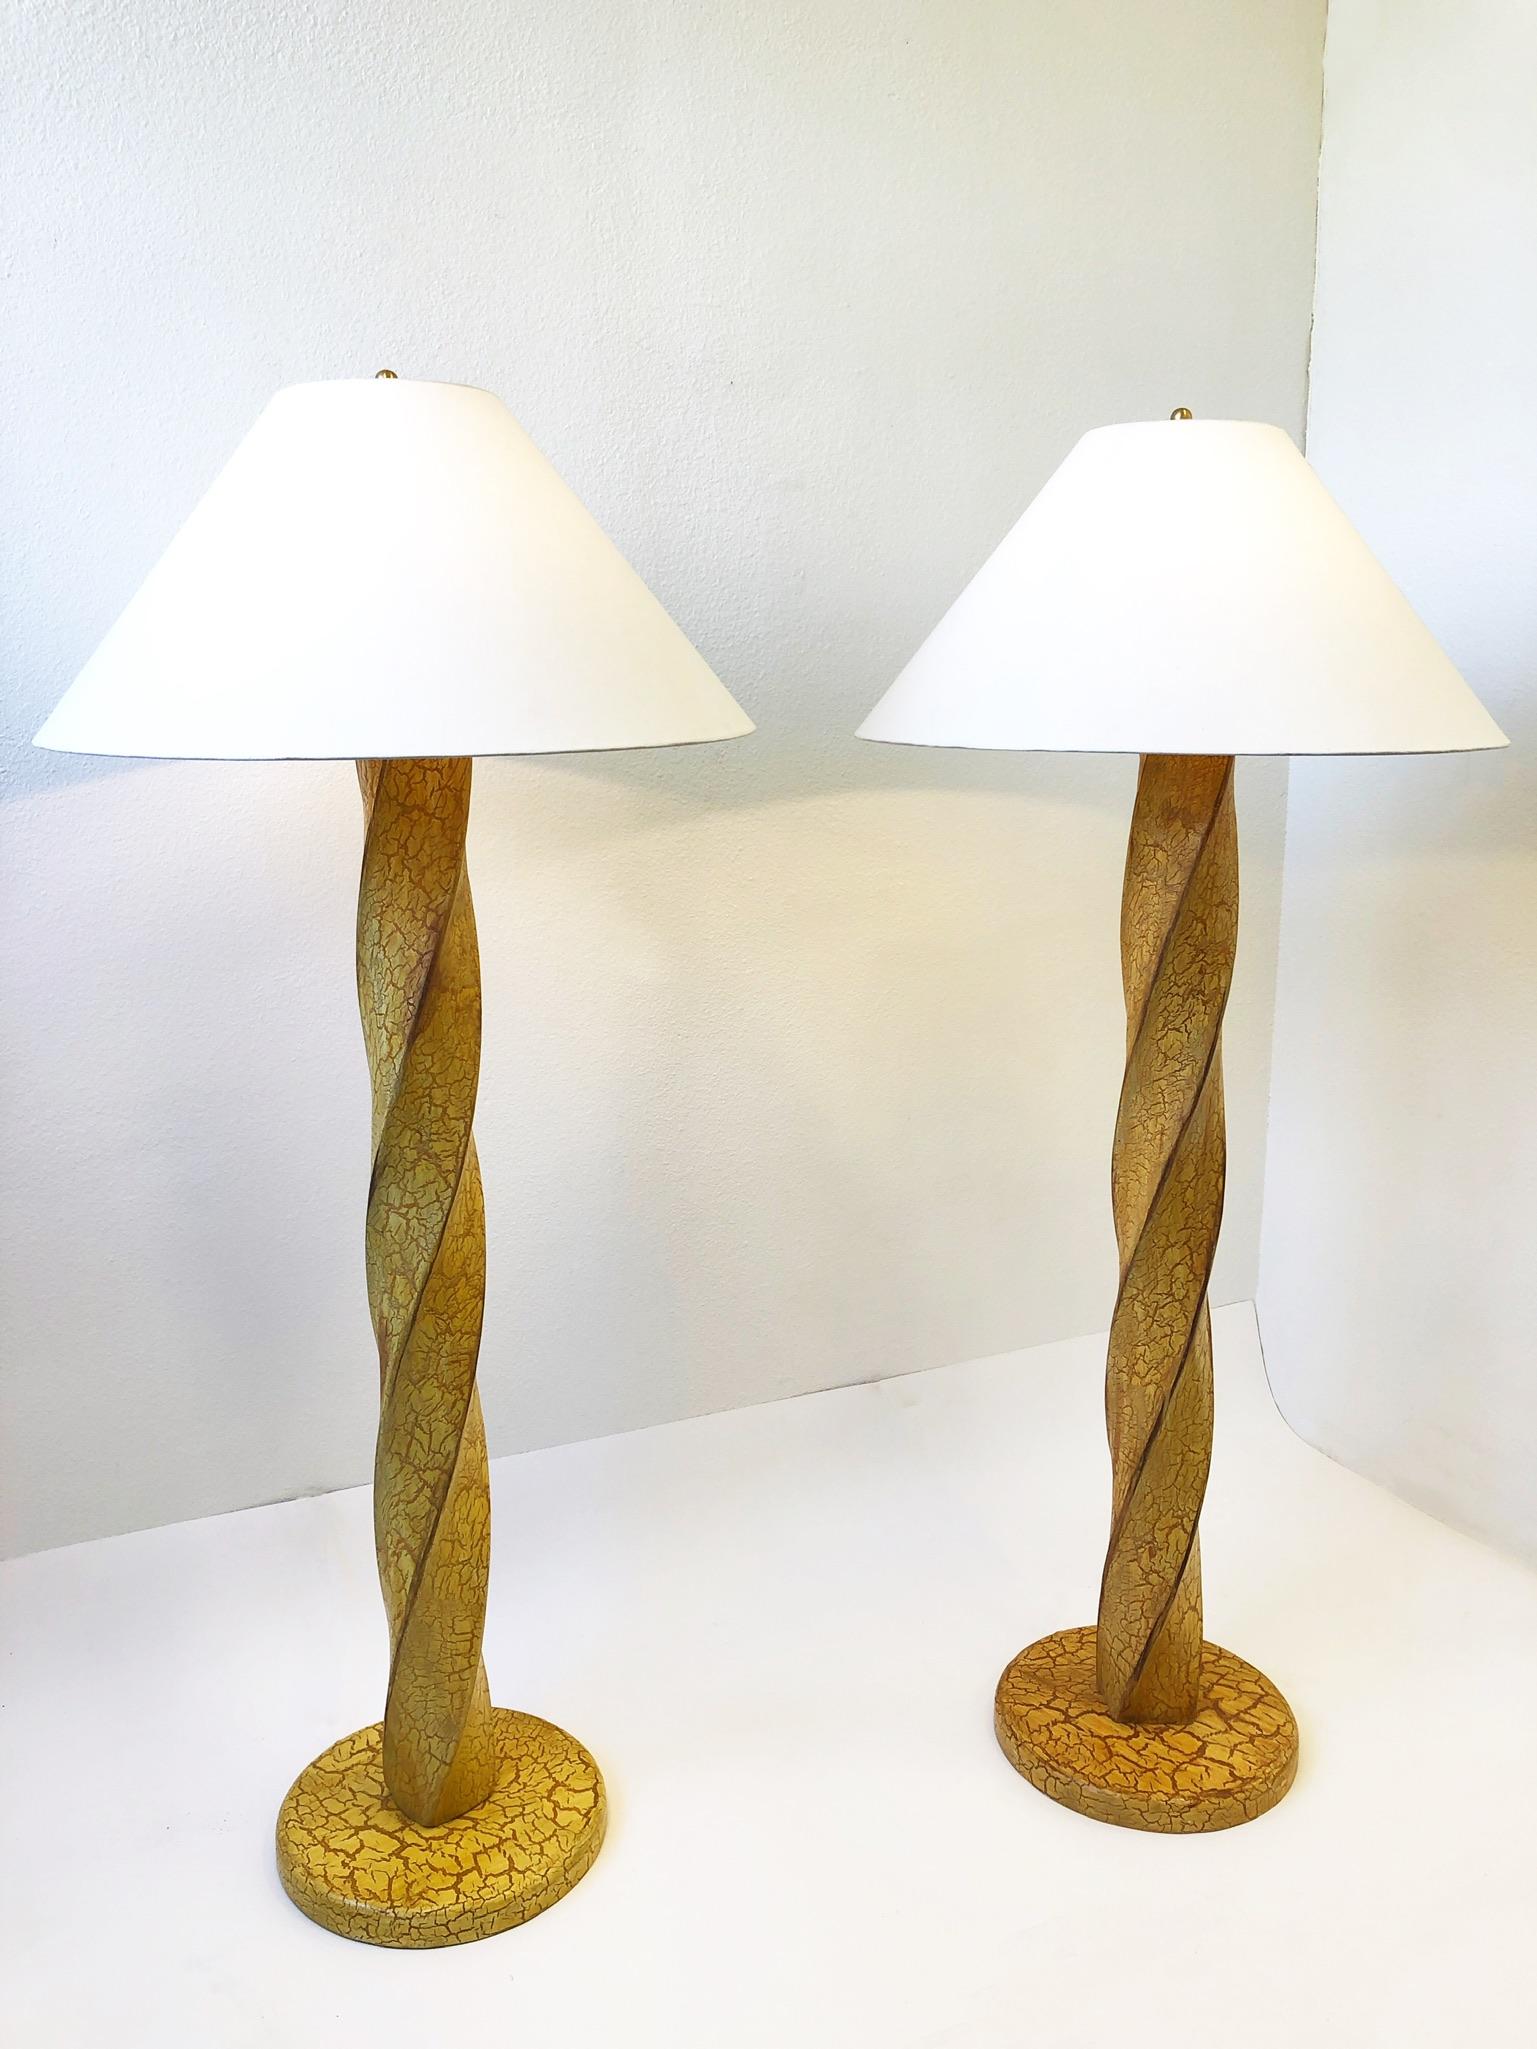 Late 20th Century Pair of Hand Carved Wood Floor Lamps by Dana Creath Designs for Steve Chase